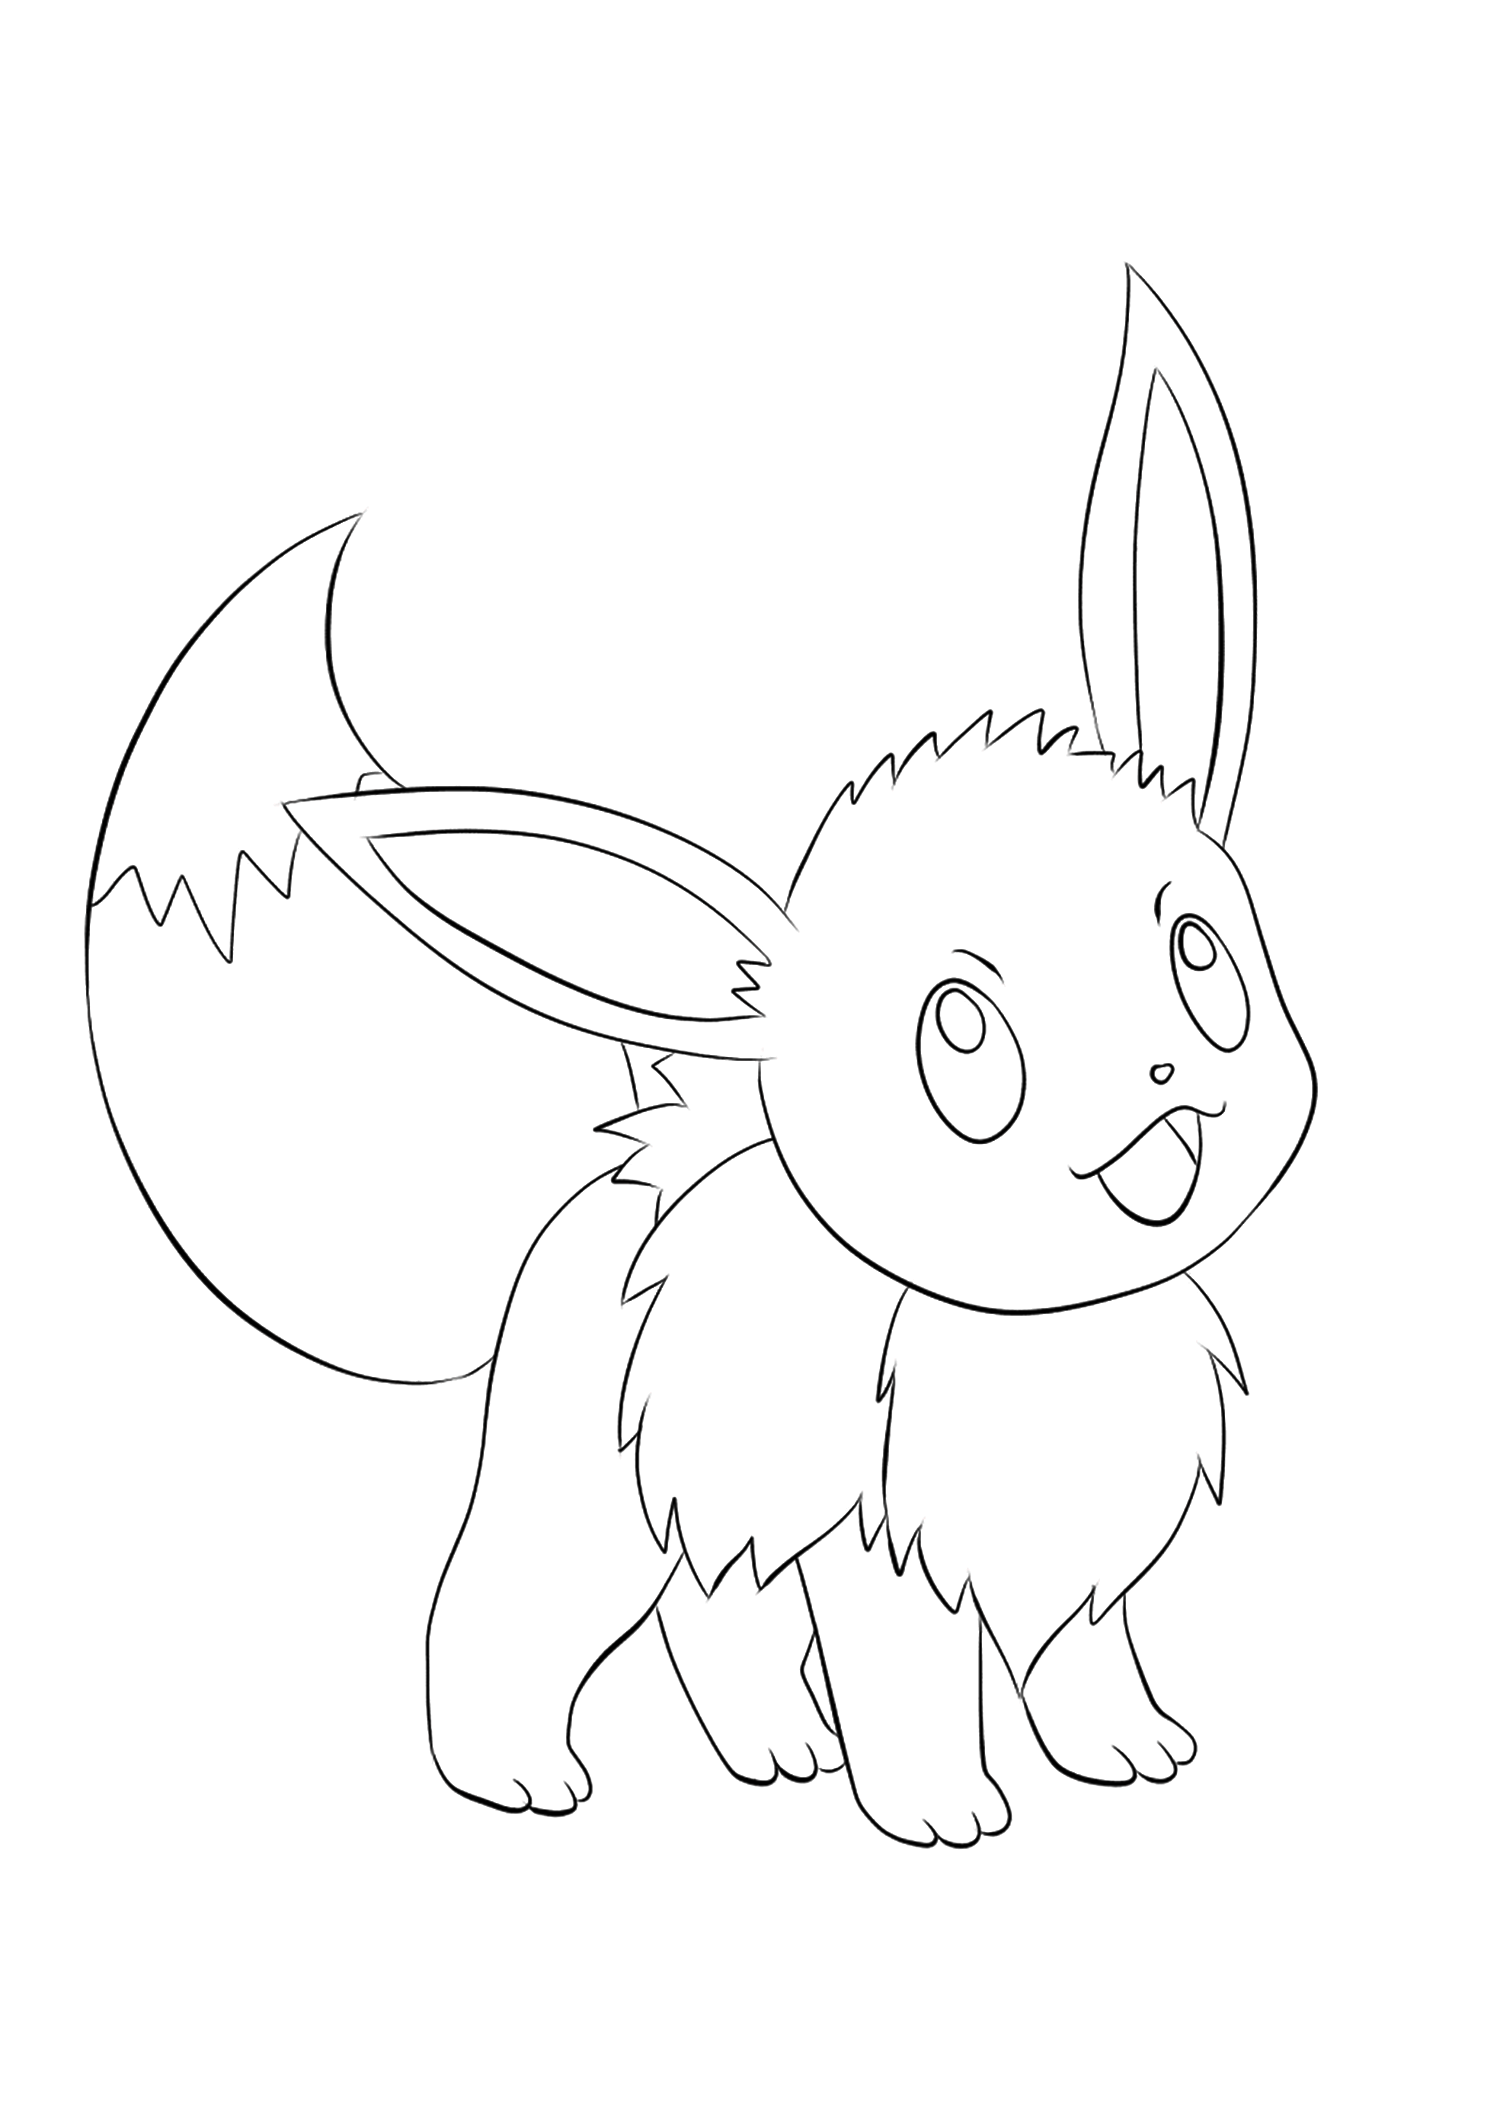 Eevee (No.133). Eevee Coloring page, Generation I Pokemon of type NormalOriginal image credit: Pokemon linearts by Lilly Gerbil on Deviantart.Permission:  All rights reserved © Pokemon company and Ken Sugimori.